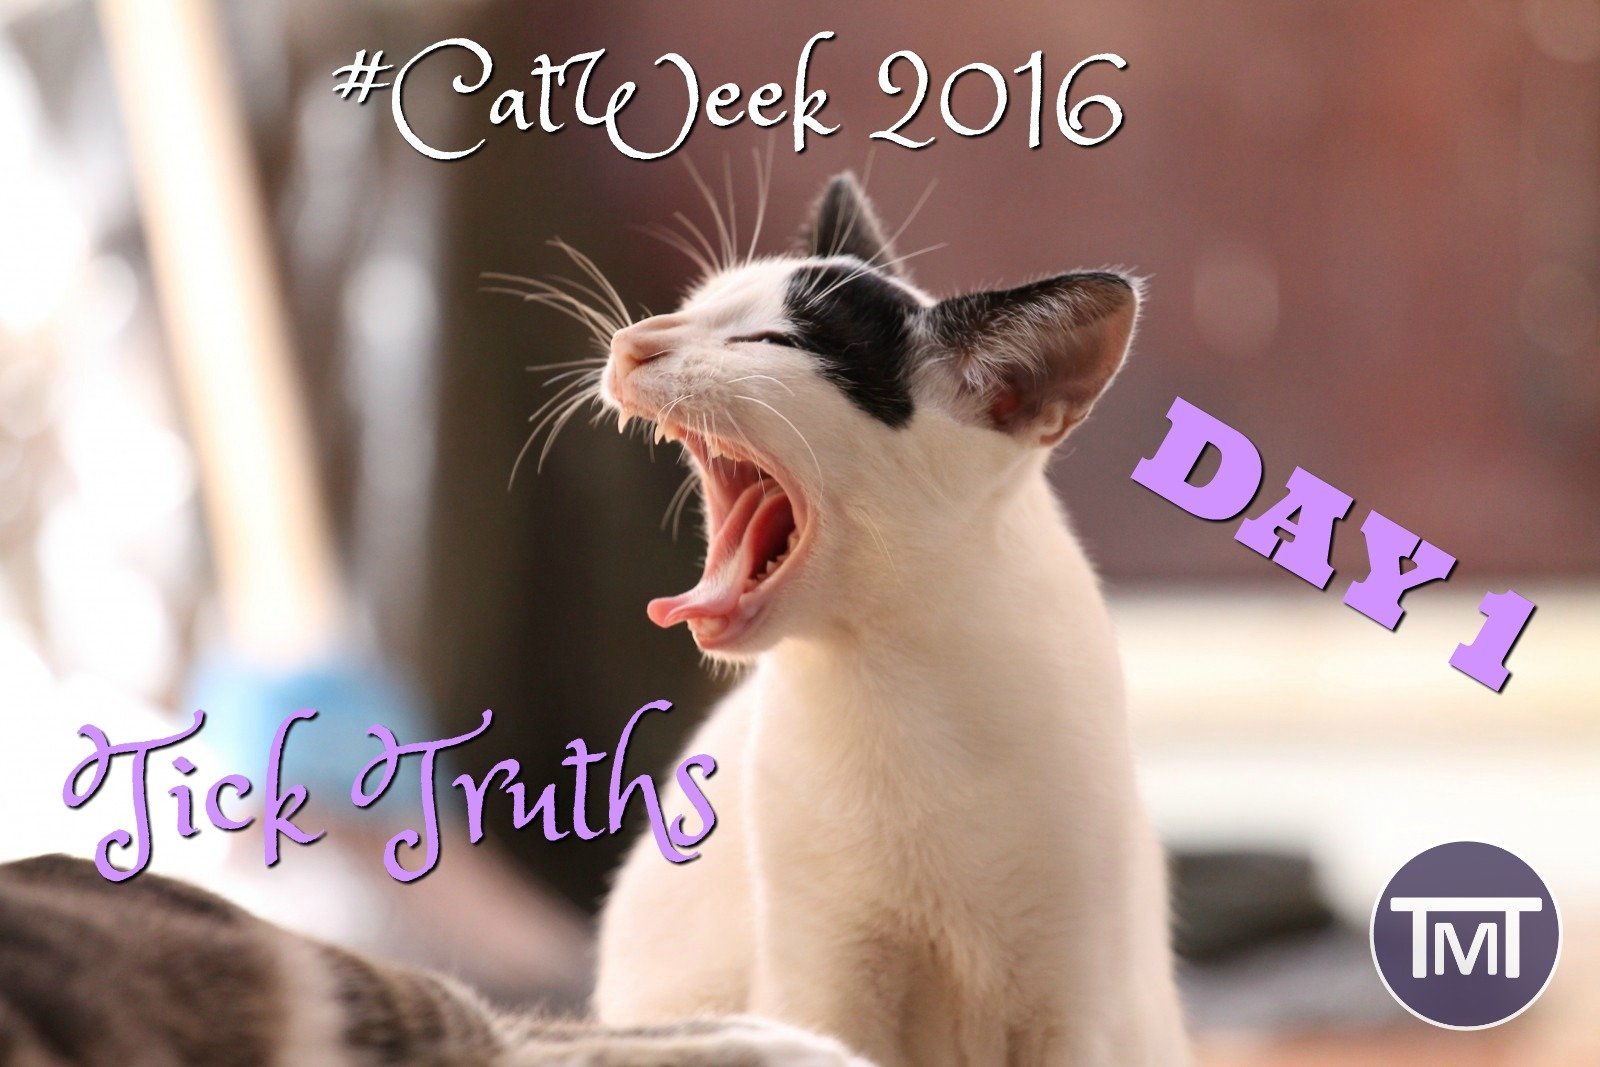 #CatWeek 2016 - Day 1 - Tick Truths - Feature Image